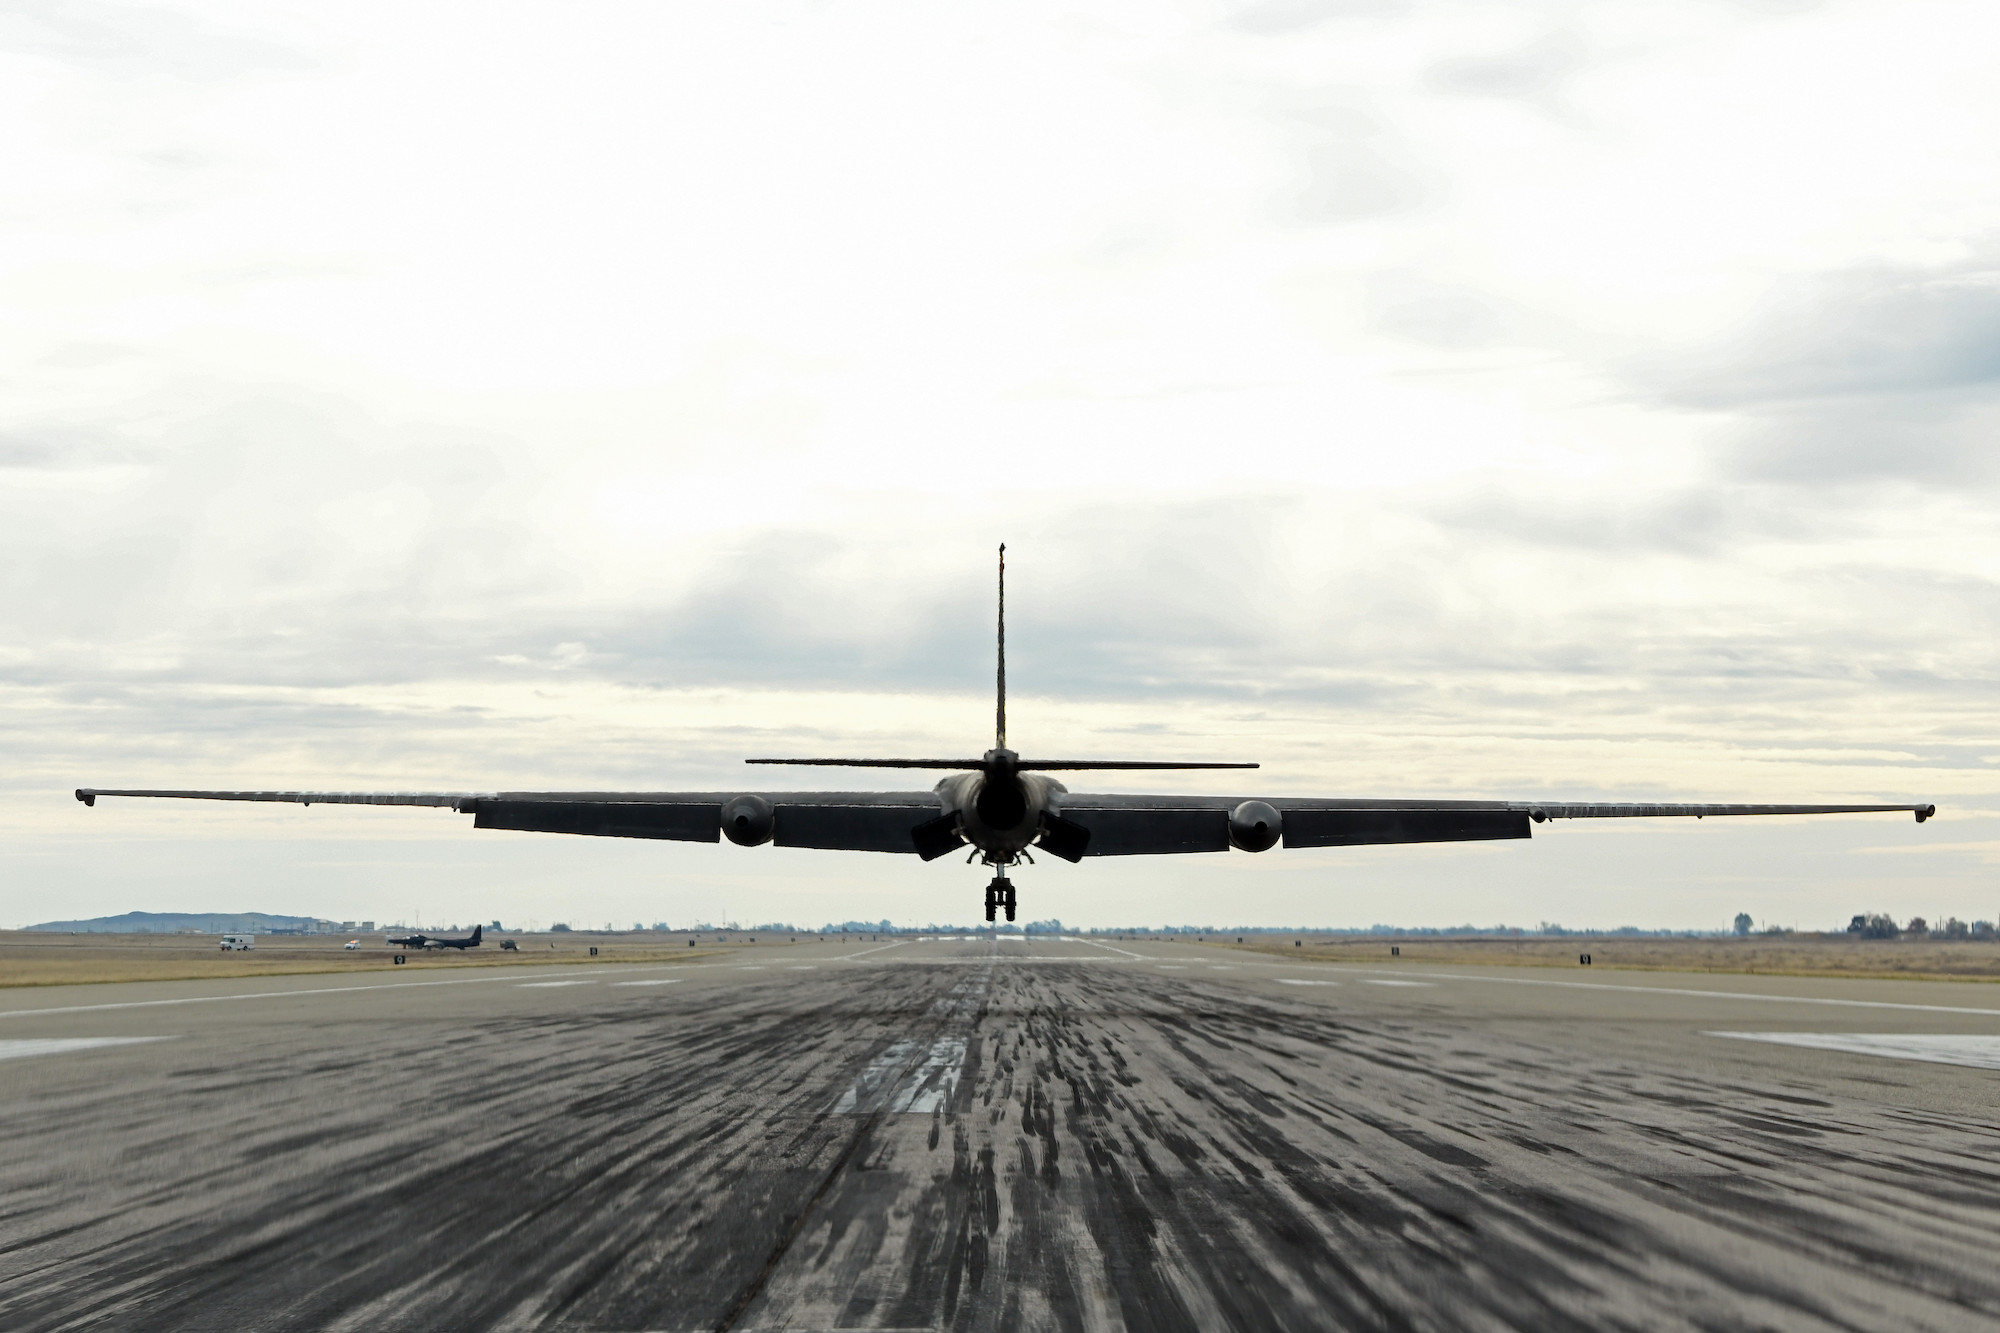 An AI just copiloted a U-2 spyplane for the very first time